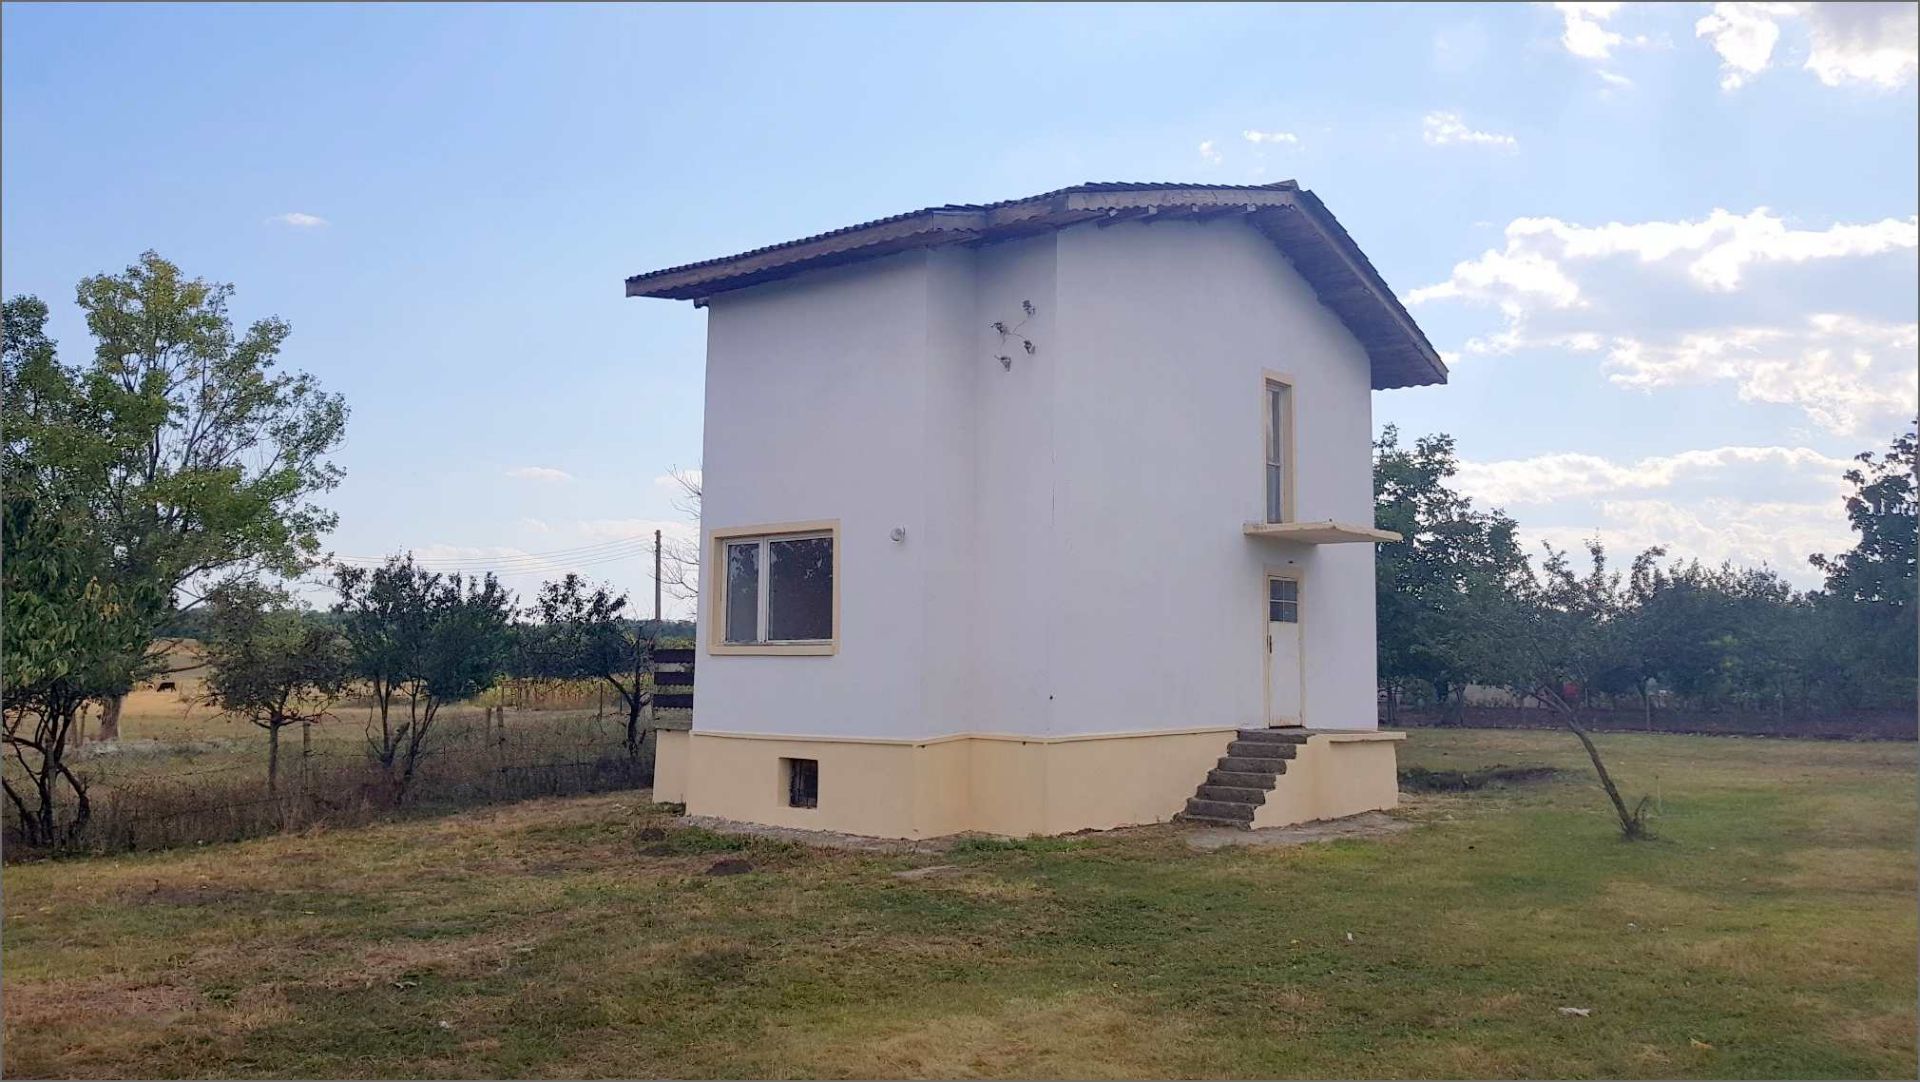 FOUR BEDROOM VILLA AND 950 SQM OF LAND NEAR THE COAST IN MALINA, BULGARIA - Image 20 of 25